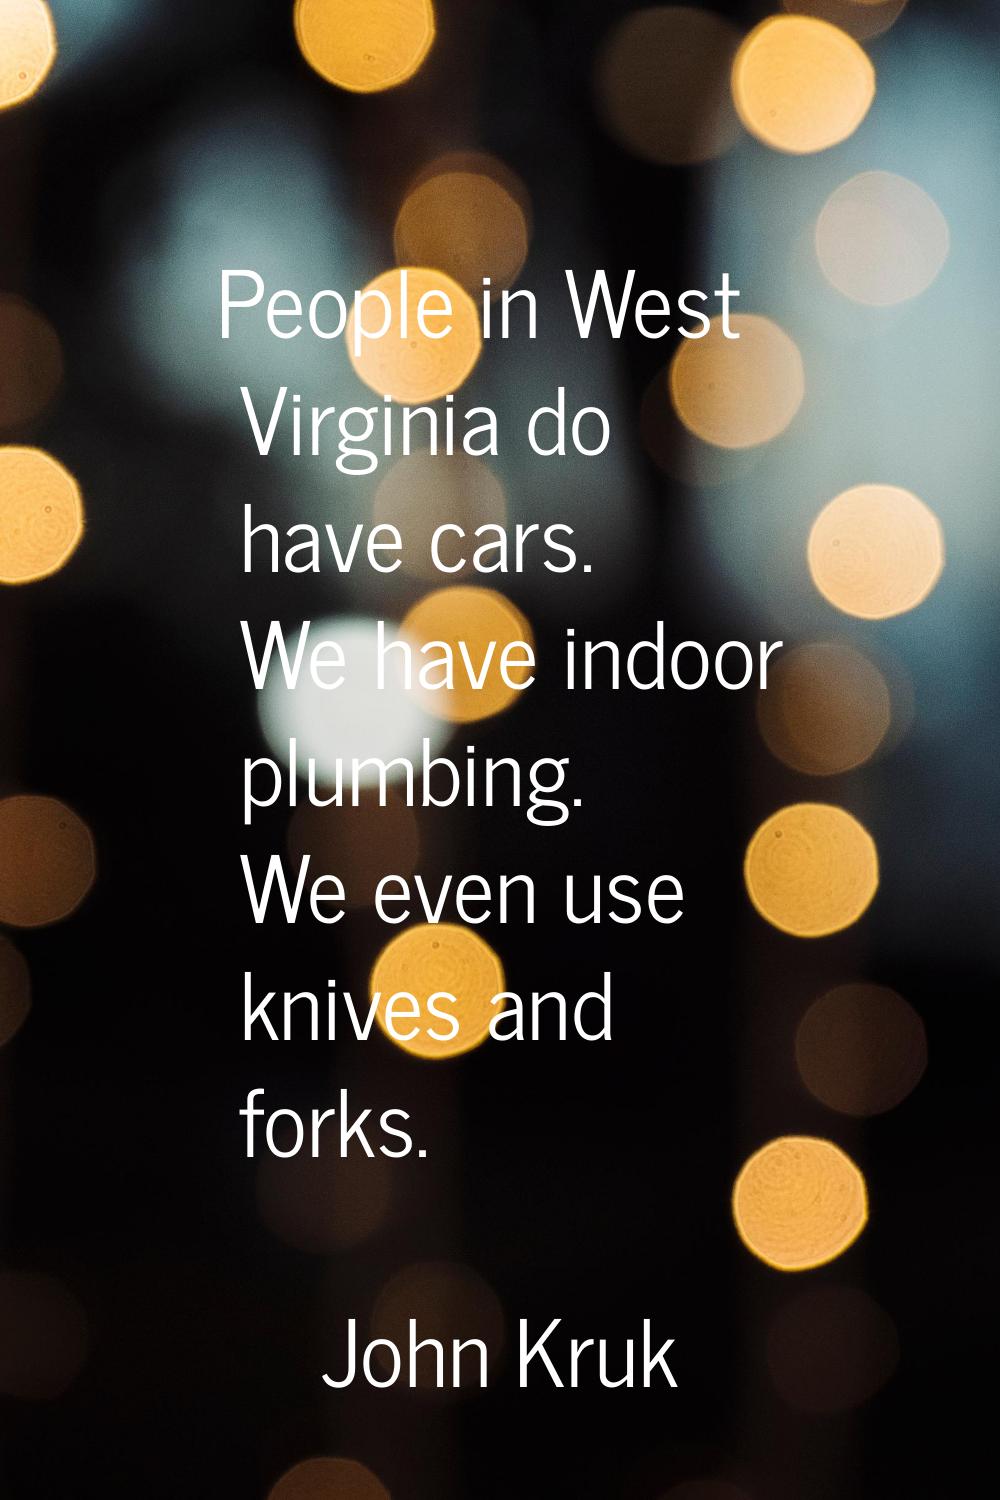 People in West Virginia do have cars. We have indoor plumbing. We even use knives and forks.